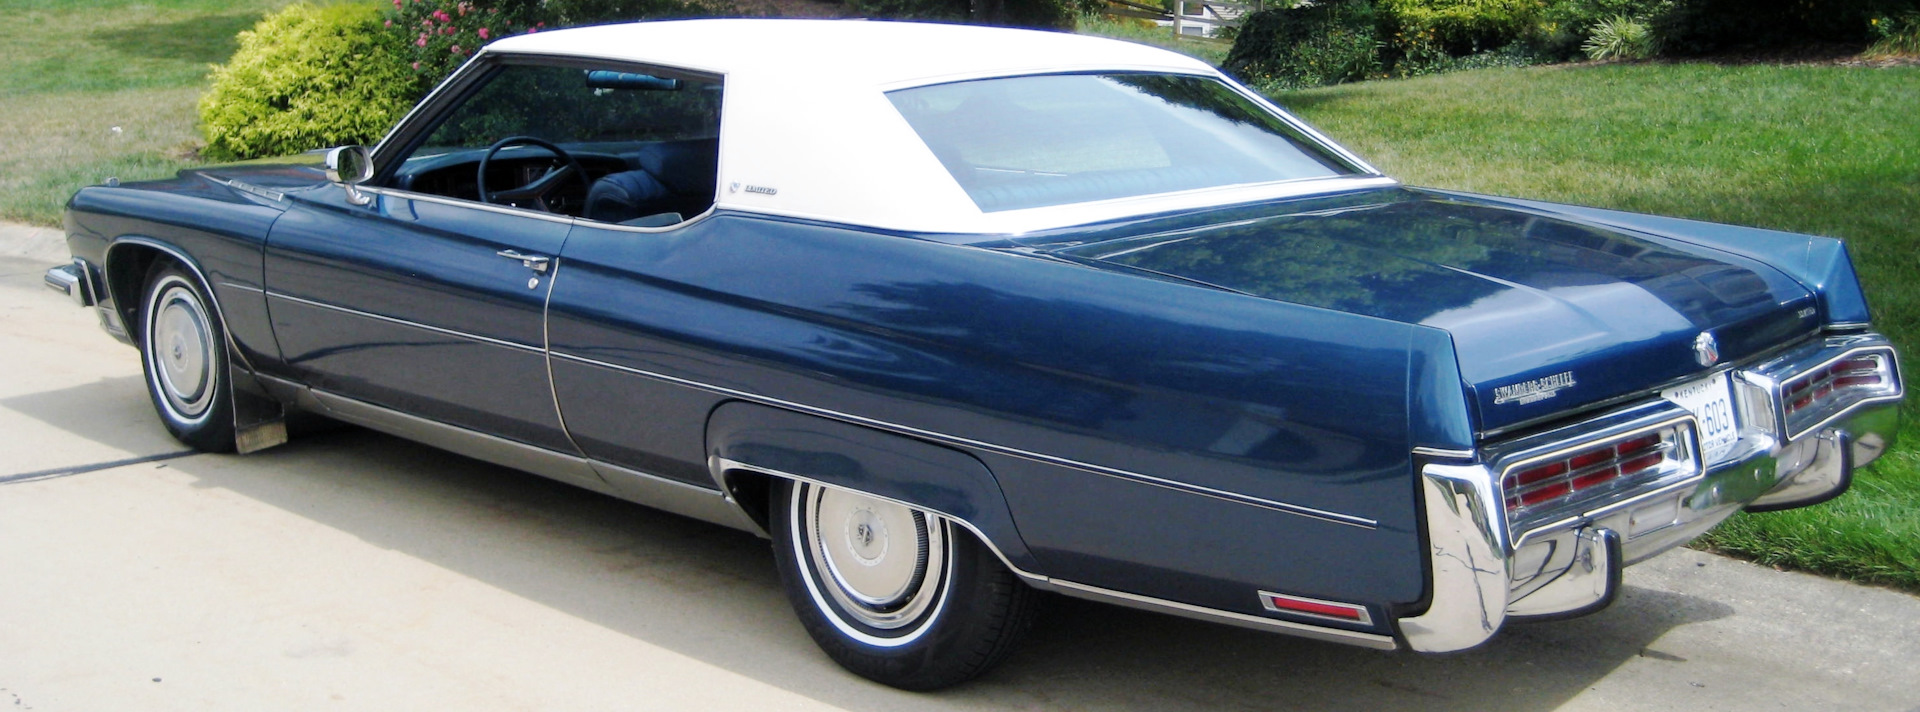 Buick 1972. Buick Electra 1973. Buick Electra 1972. Buick Electra 225 1972. Buick Electra 1982.